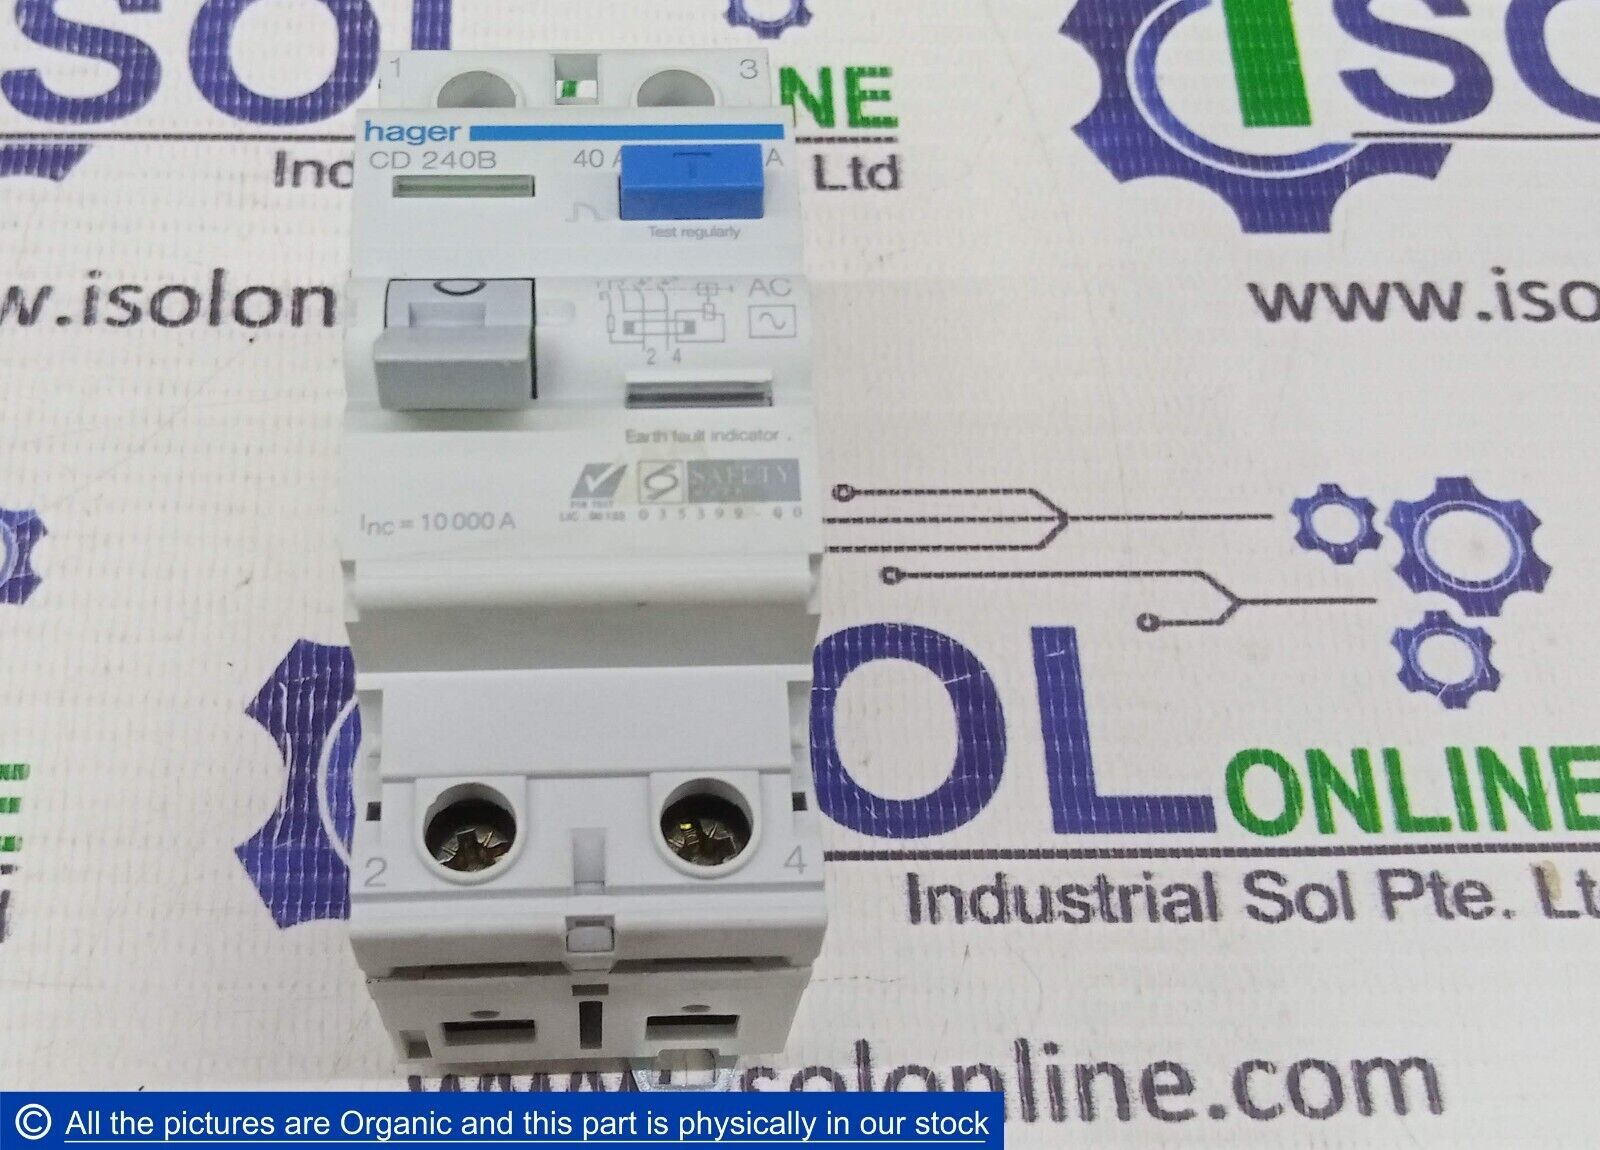 Hager CD 240B Inter Differential Residual Current Circuit Breaker Device CD240B - $147.51